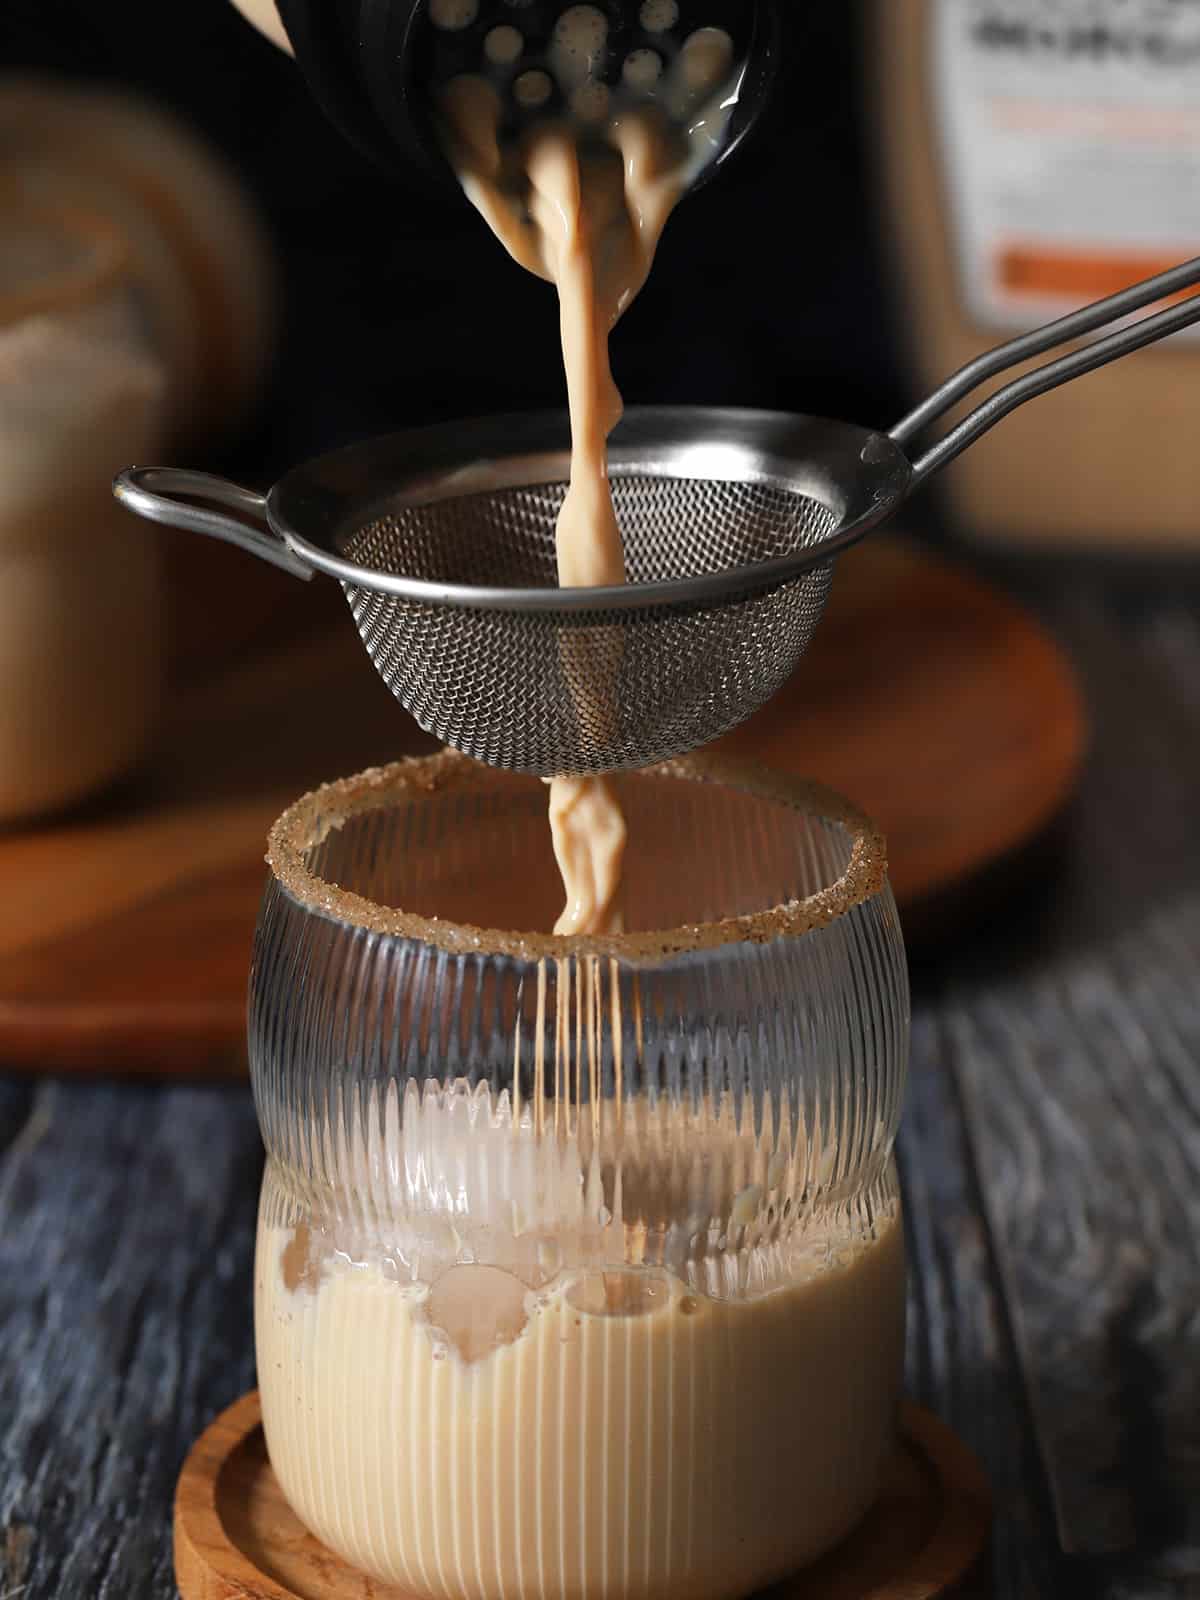 Pumpkin Spice white Russian cocktail being poured through a strainer and into a glass. 